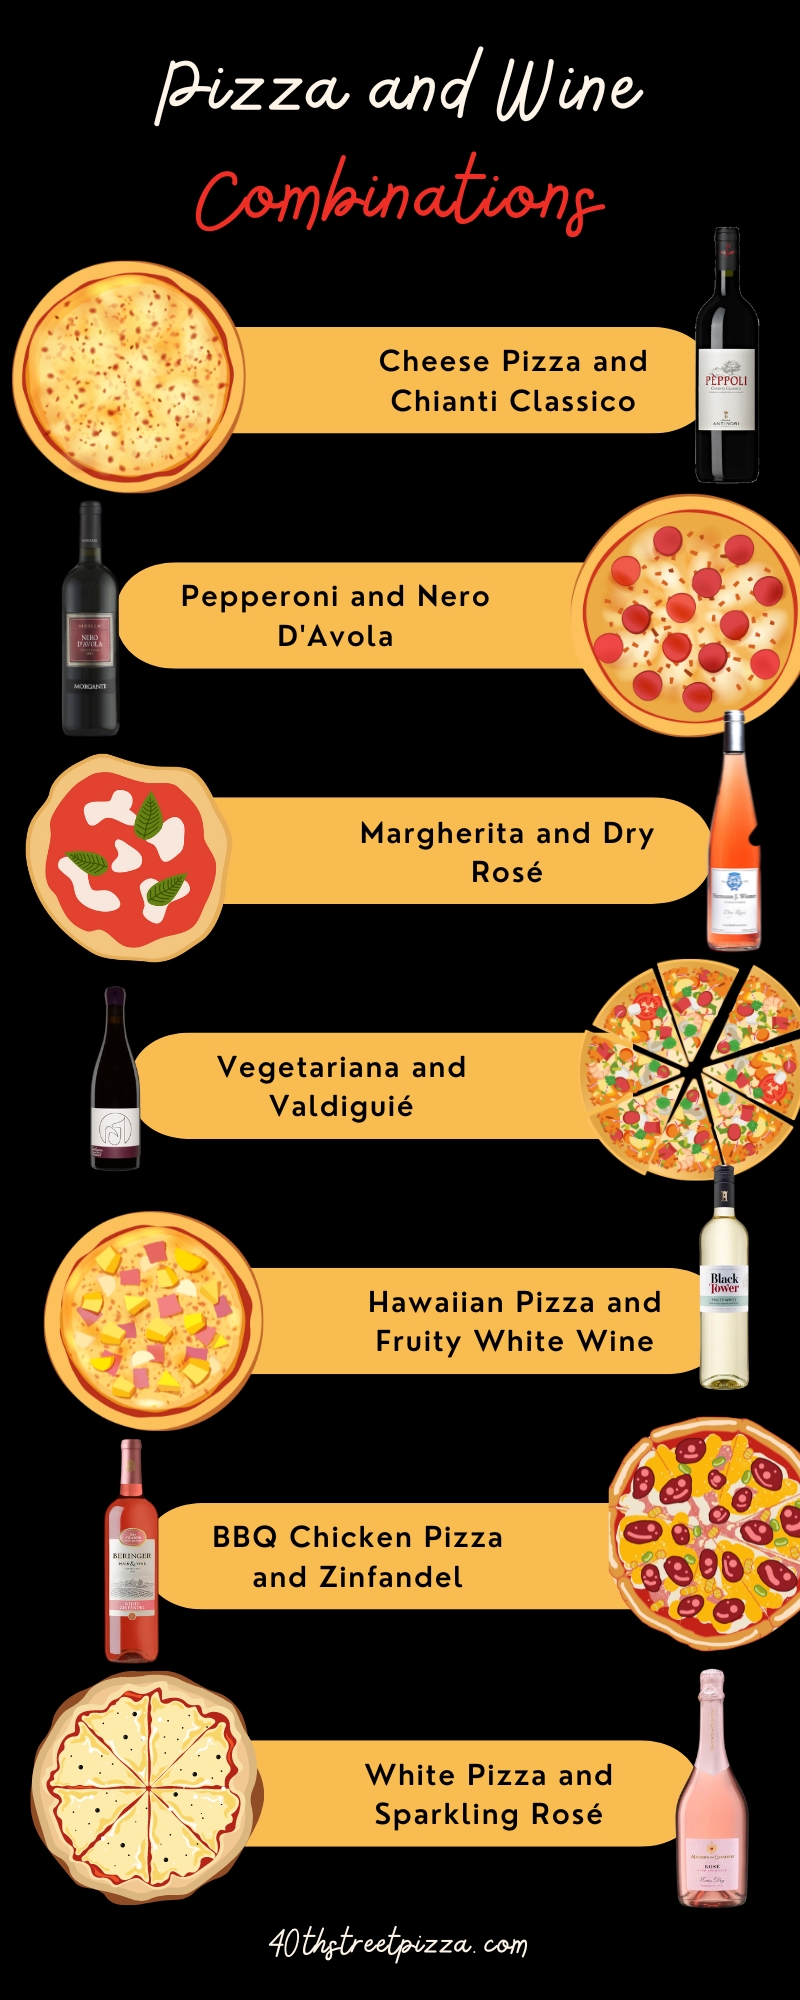 Illustration of Pizza and Wine Combinations